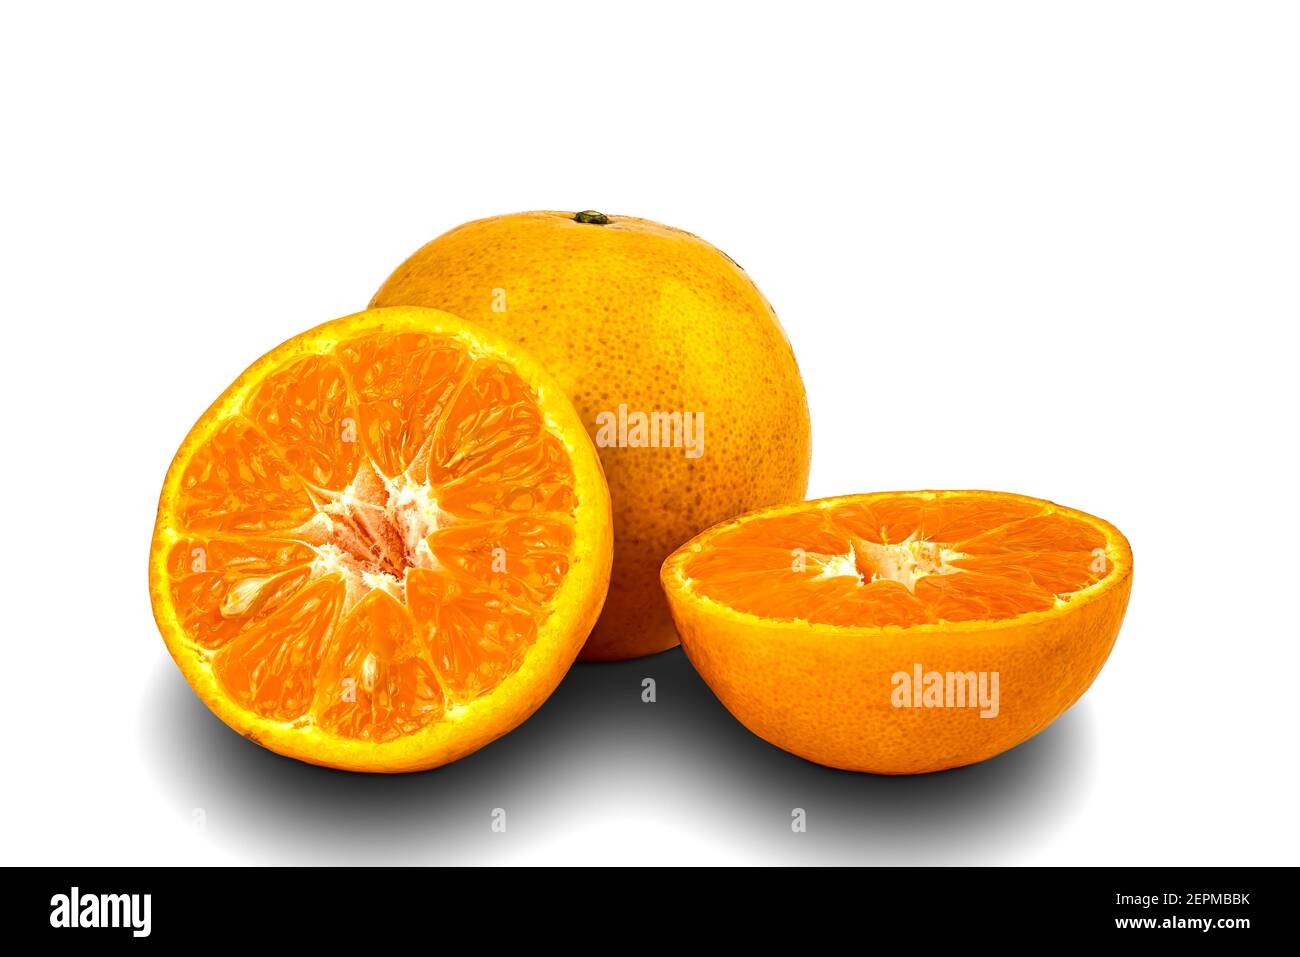 Whole and haves ripe oranges on white background with clipping path. Stock Photo